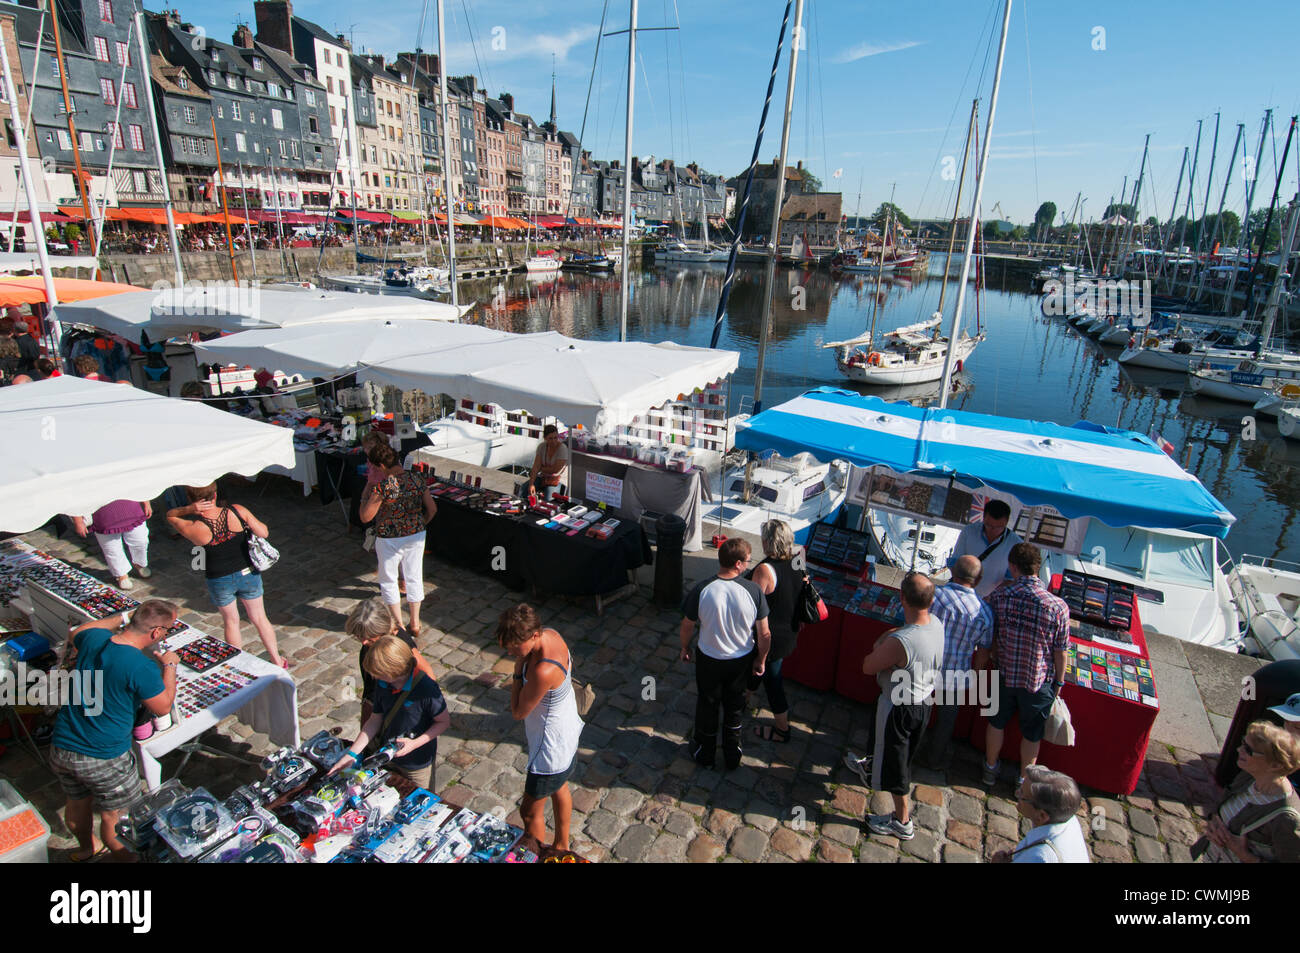 Honfleur market by the Old Dock, Basse-Normandie, France. Stock Photo